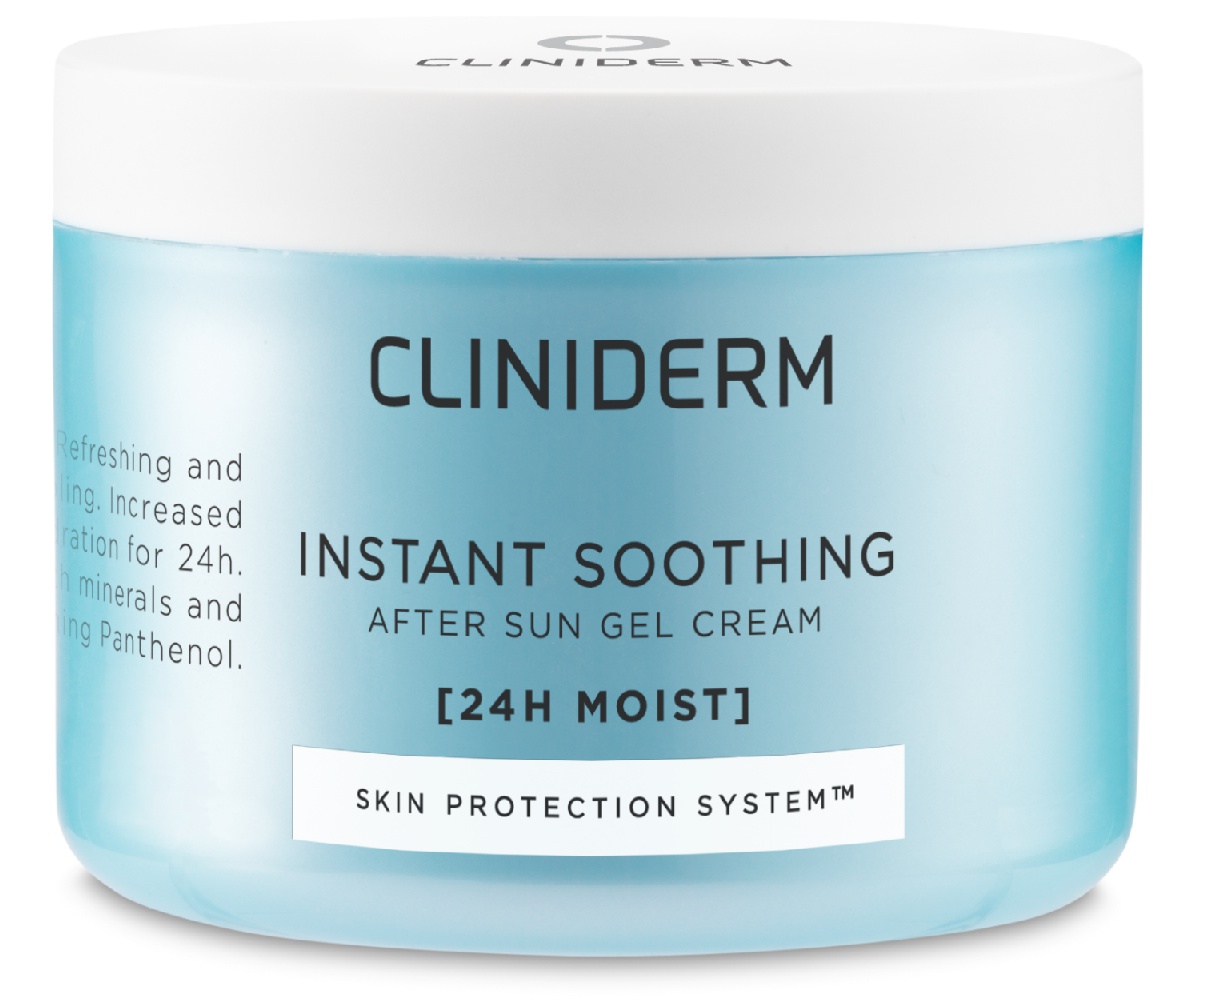 Cliniderm Instant Soothing Aftersun Gel Cream